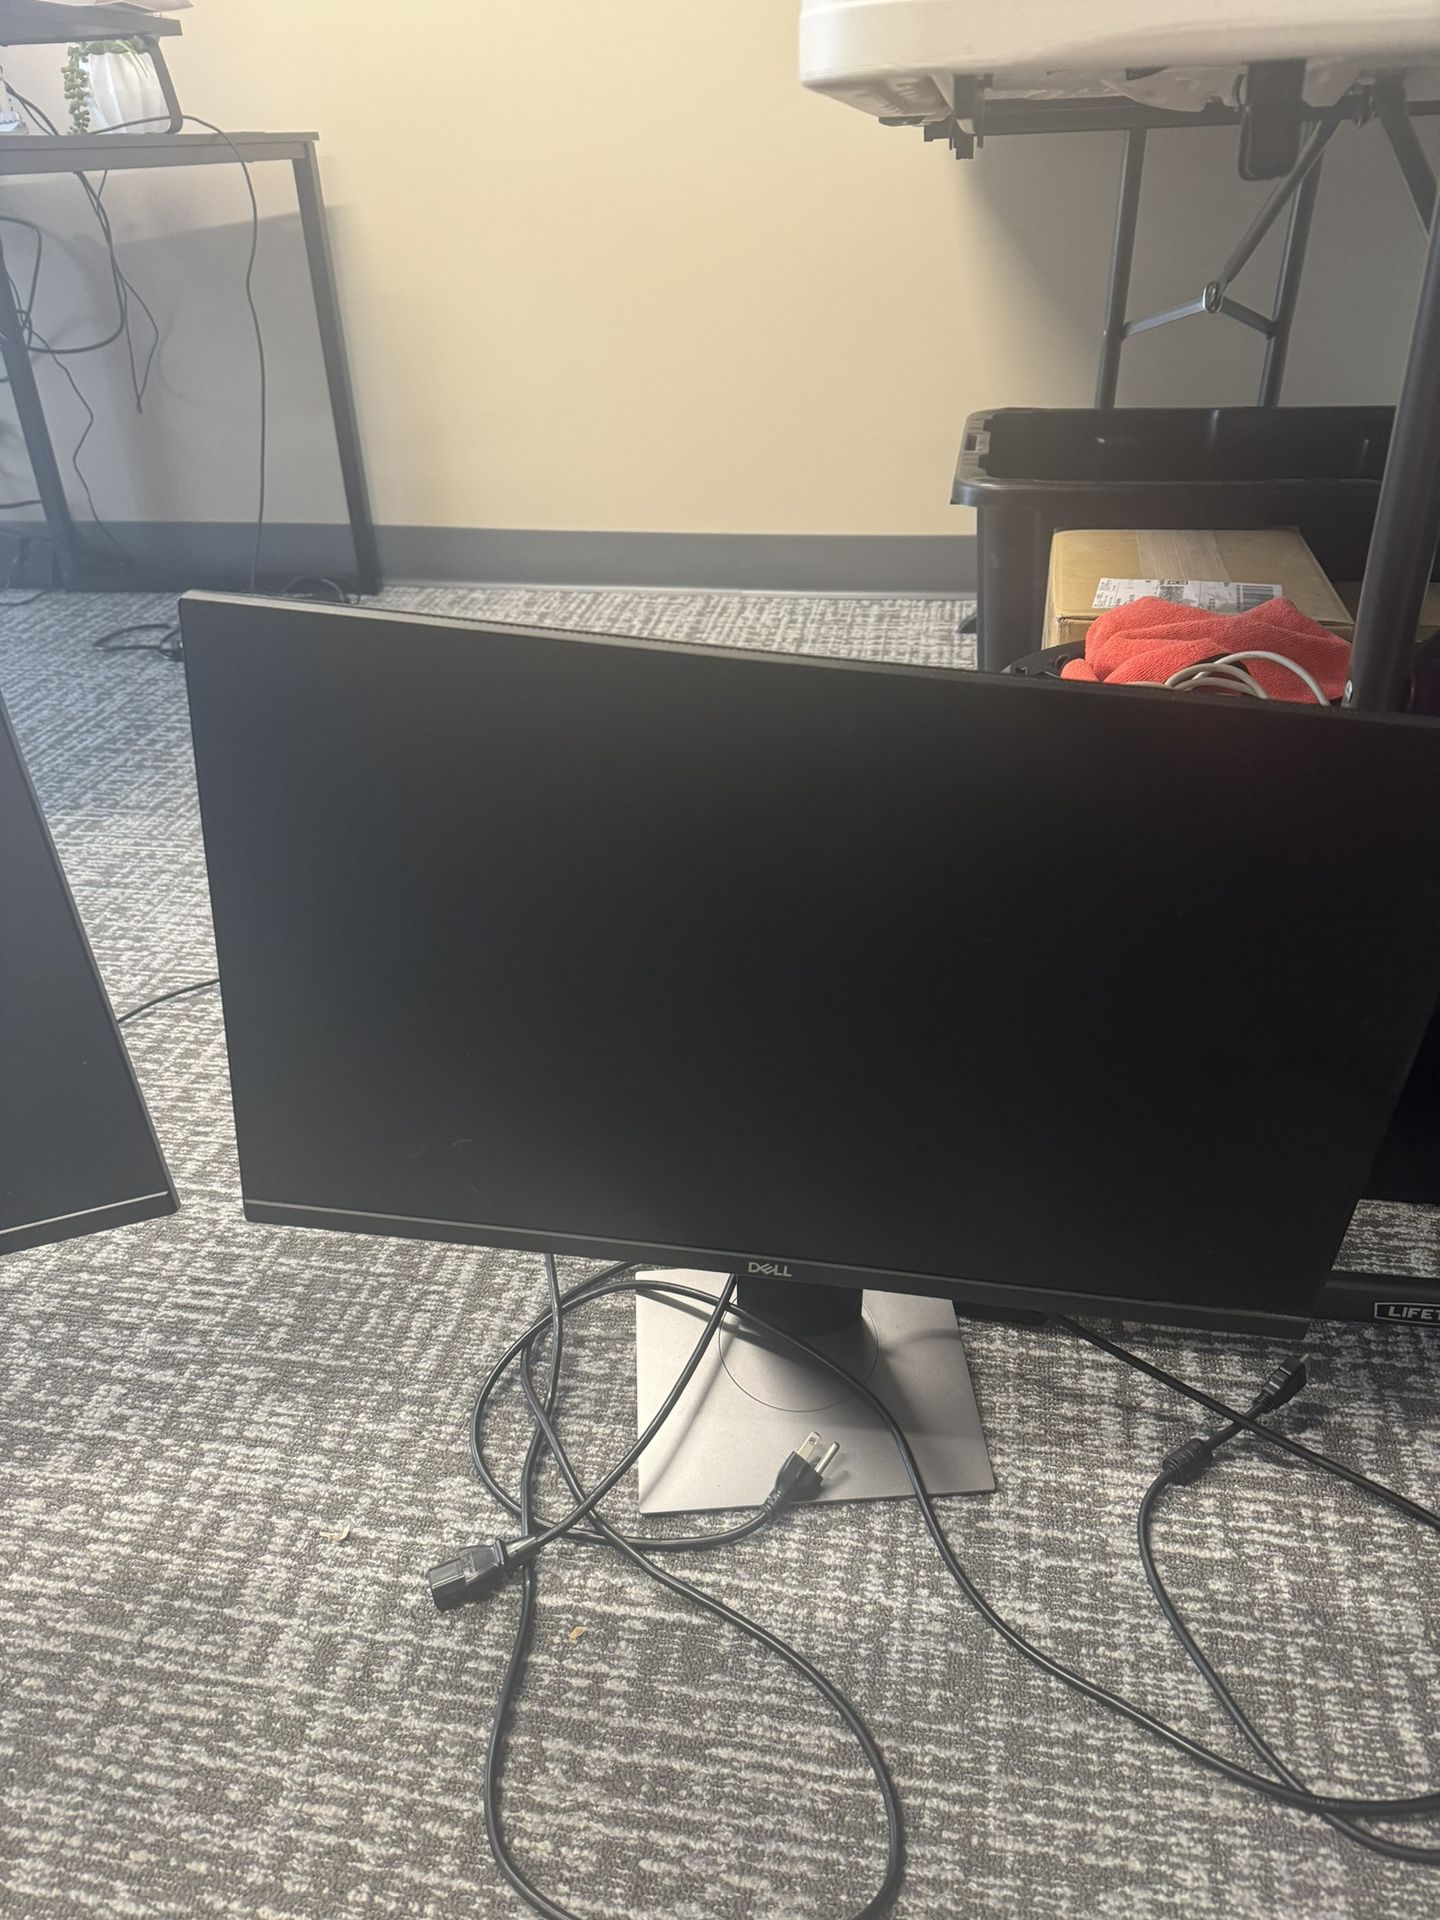 Dual Dell 24” Monitors With Stands